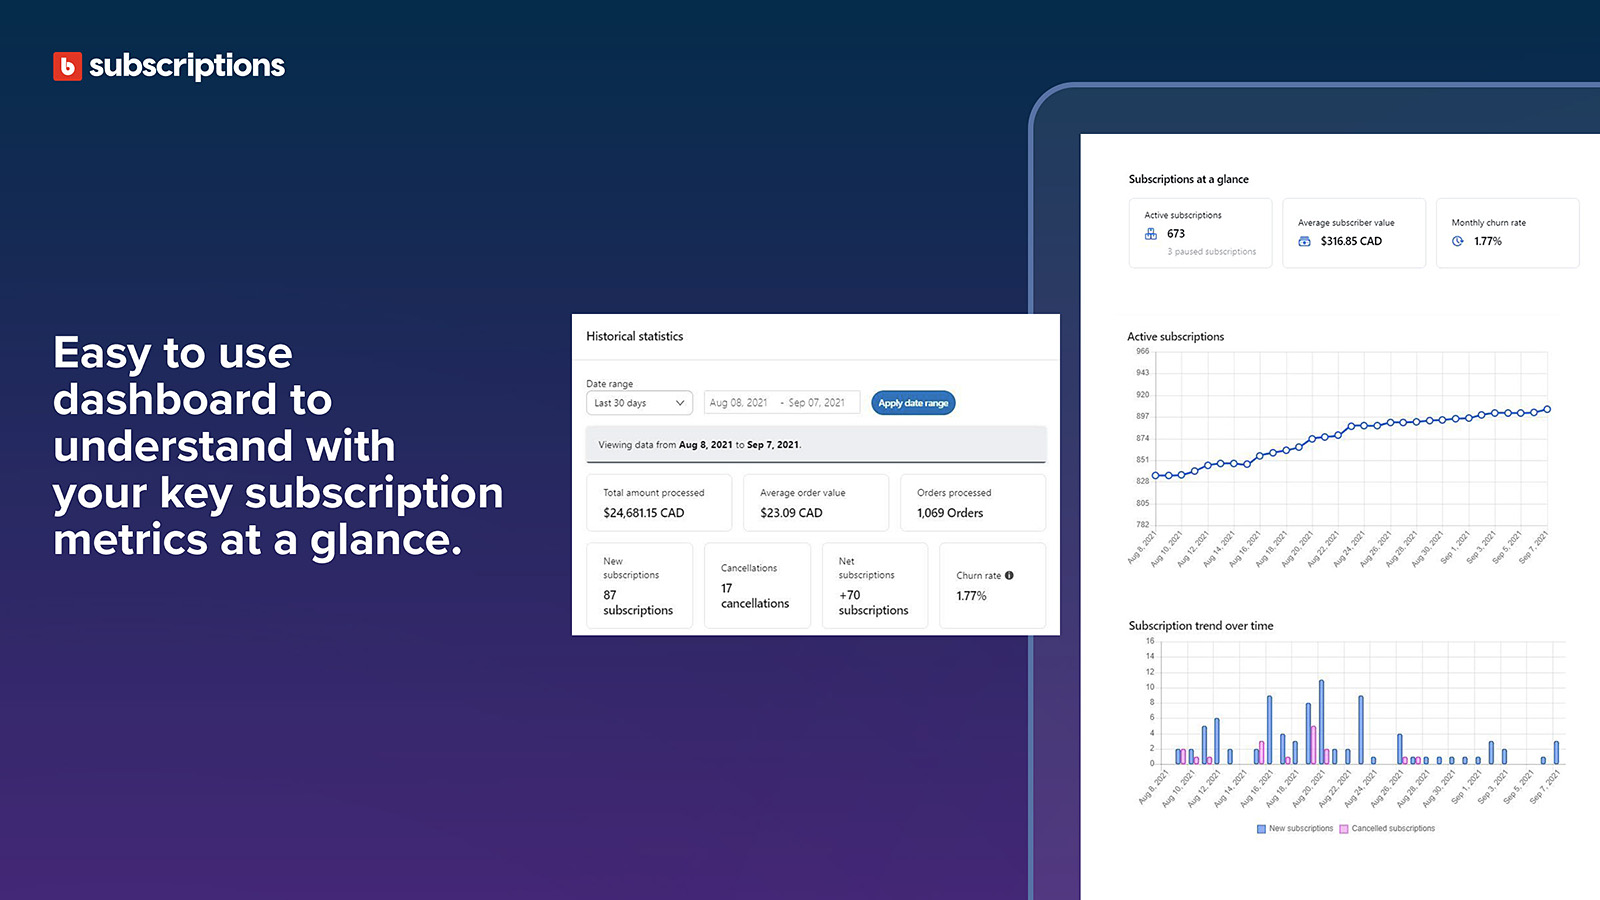 Understand your key subscription metrics at a glance.